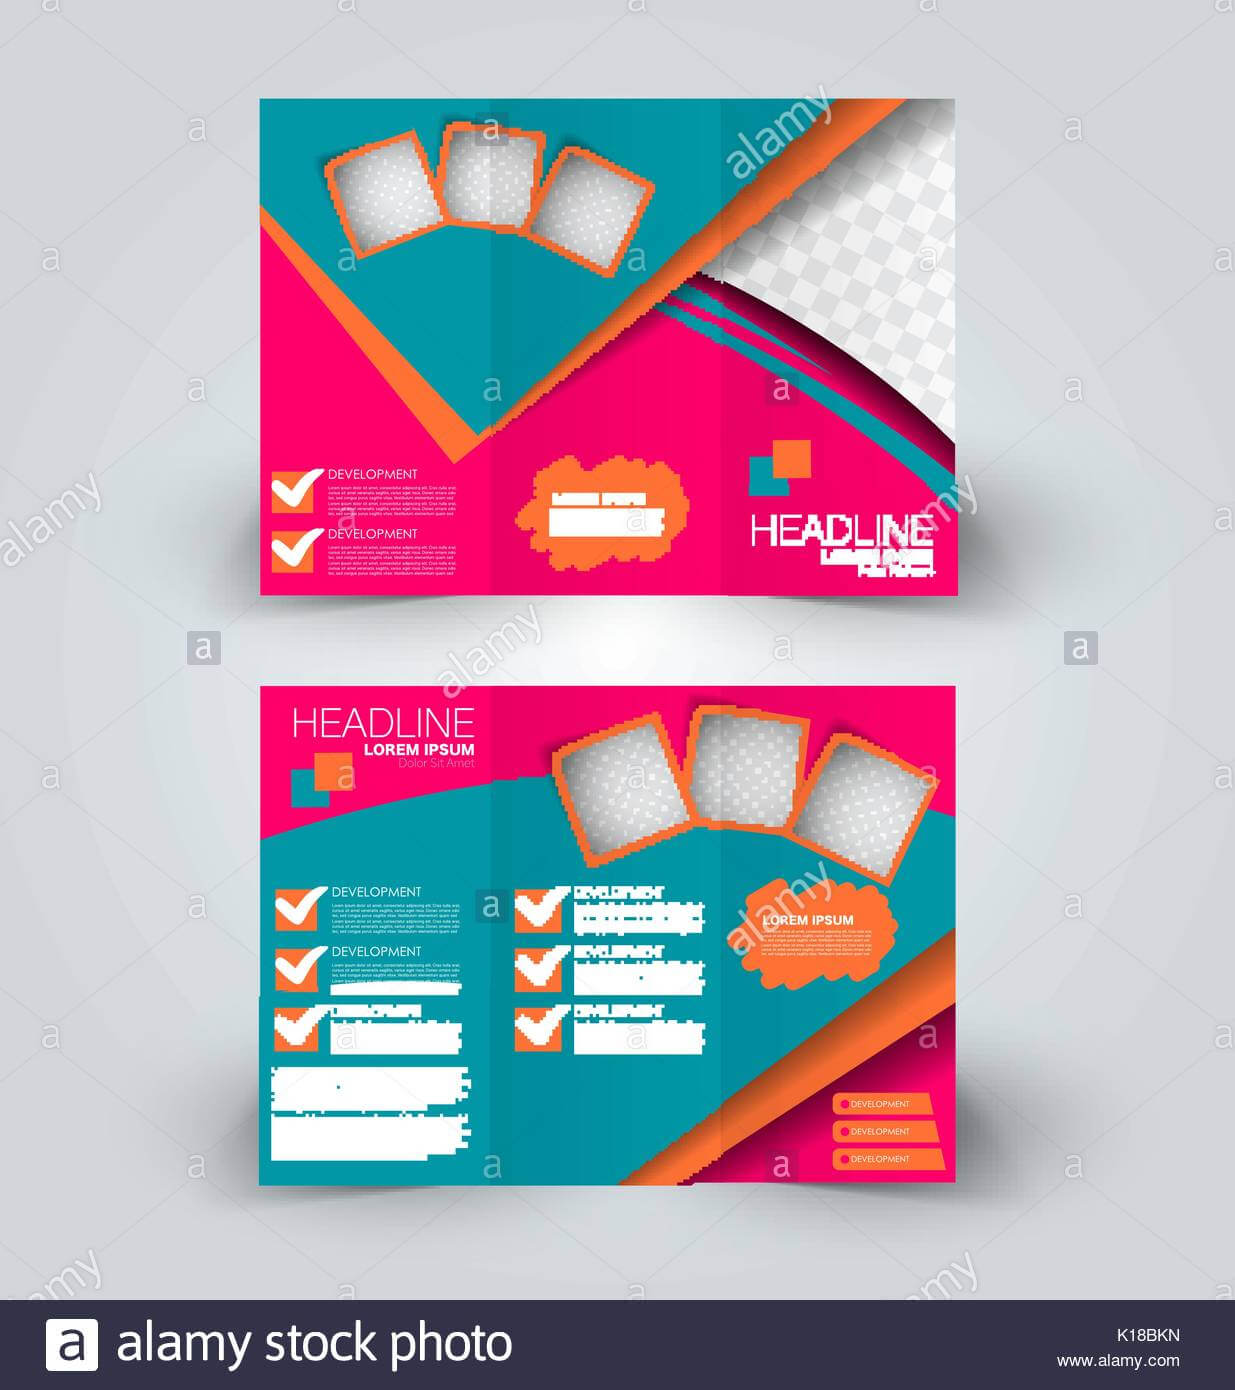 Brochure Design Template For Business, Education For Brochure Design Templates For Education